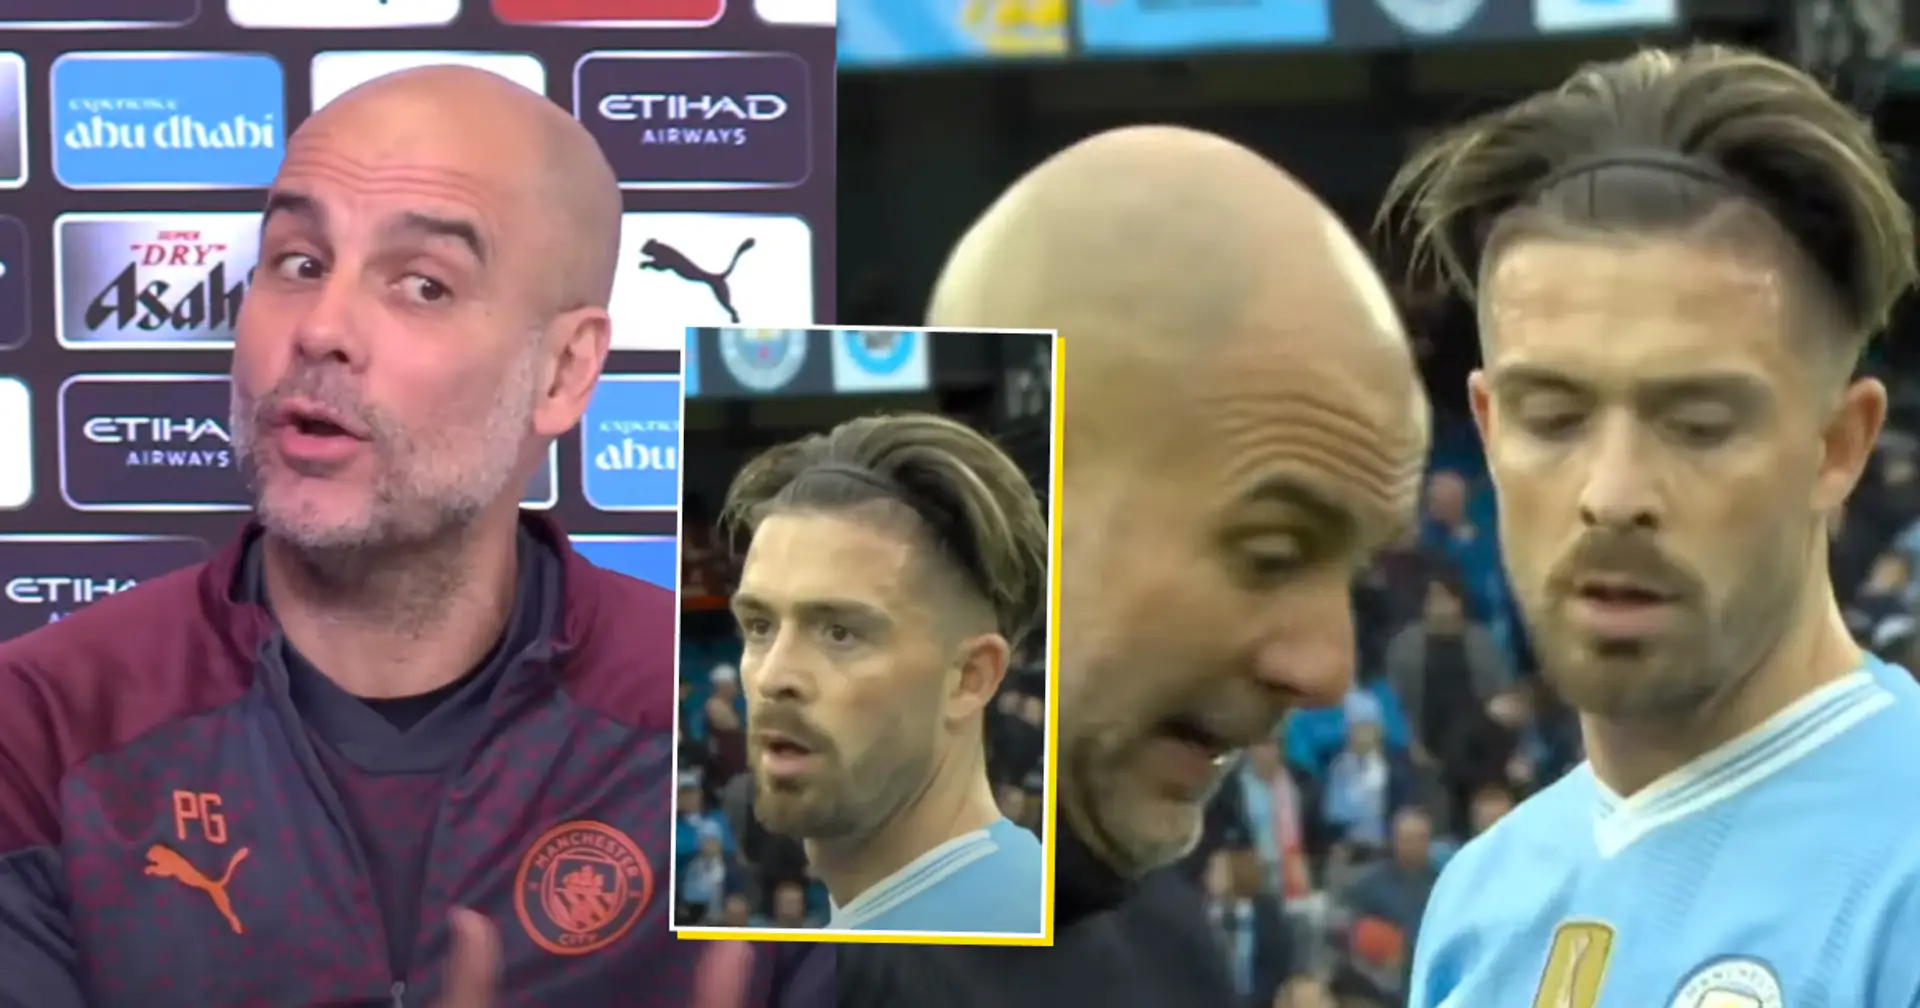 'For my ego': Pep Guardiola finally explains why he coaches Man City players at full-time in front of cameras